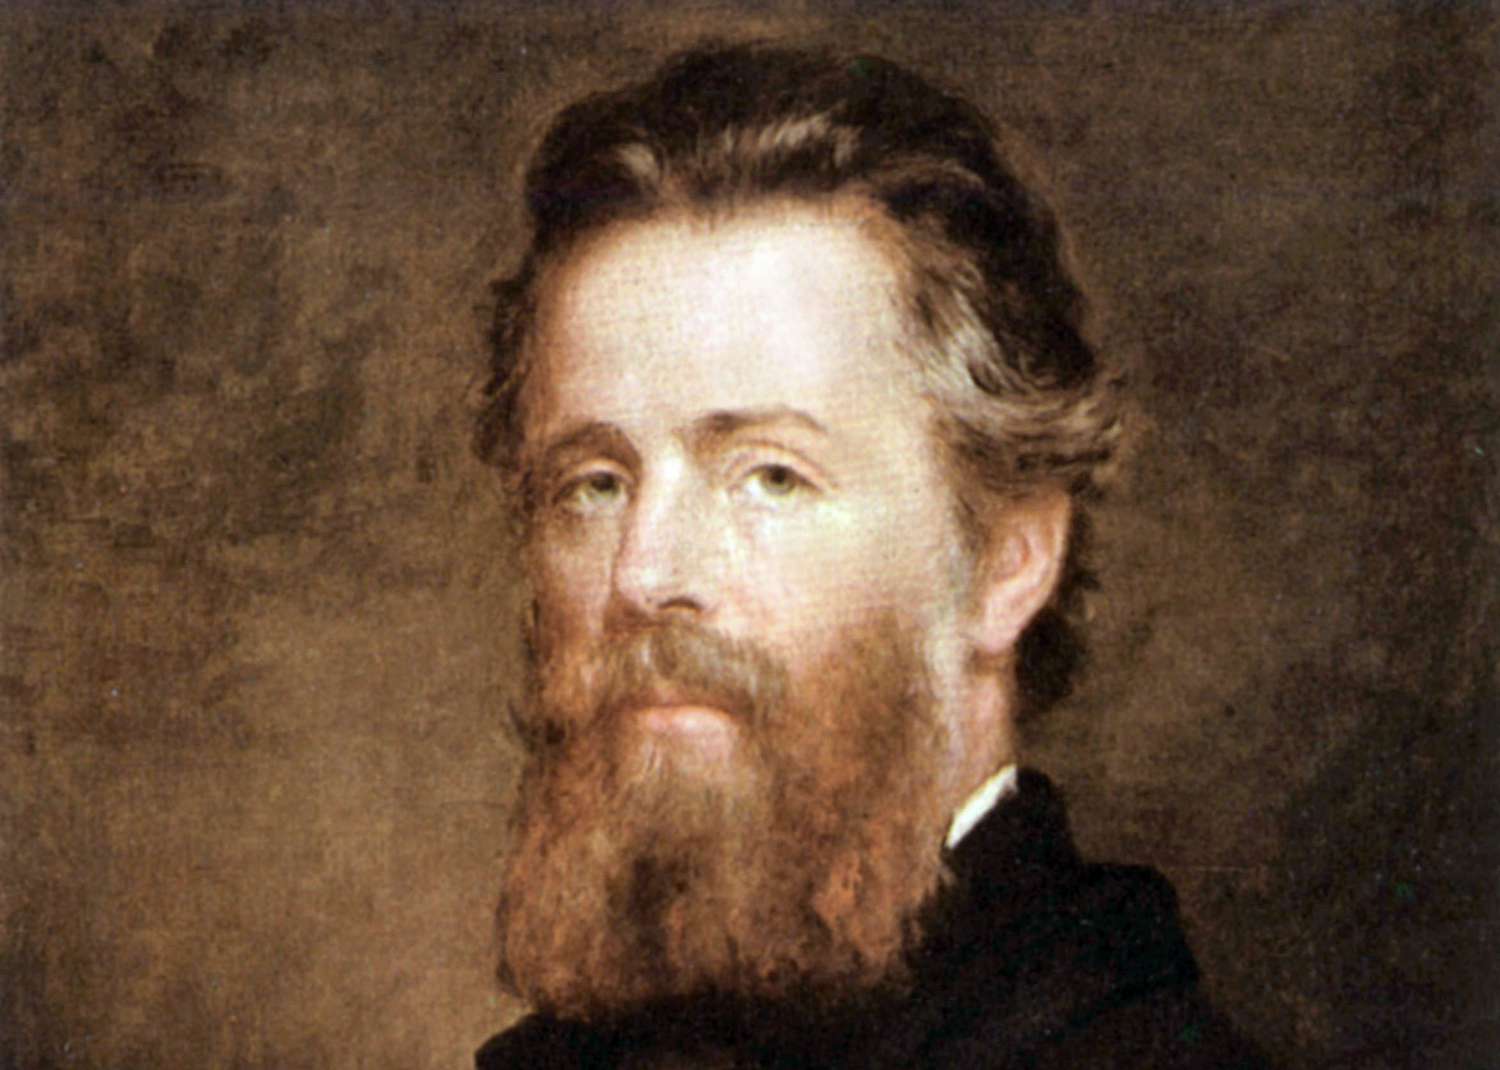 Herman Melville publica Moby Dick